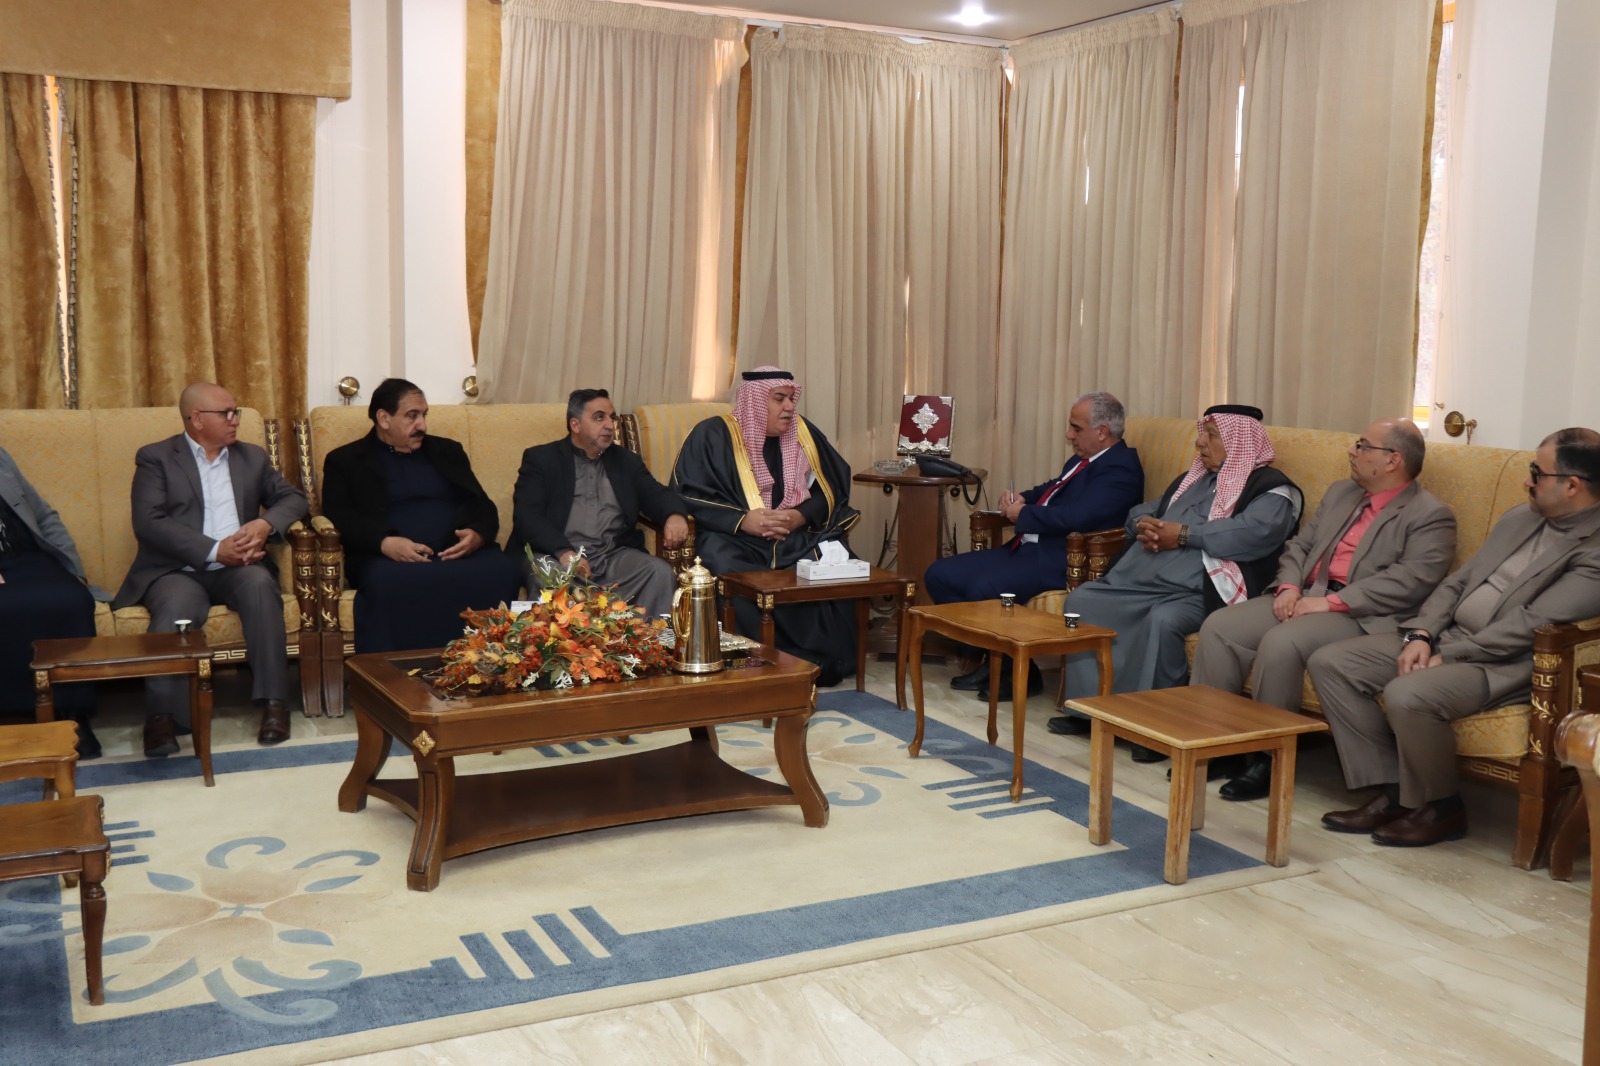 The President of Al-Hussein Bin Talal University meets the President and members of the Ma'an Chamber of Commerce.